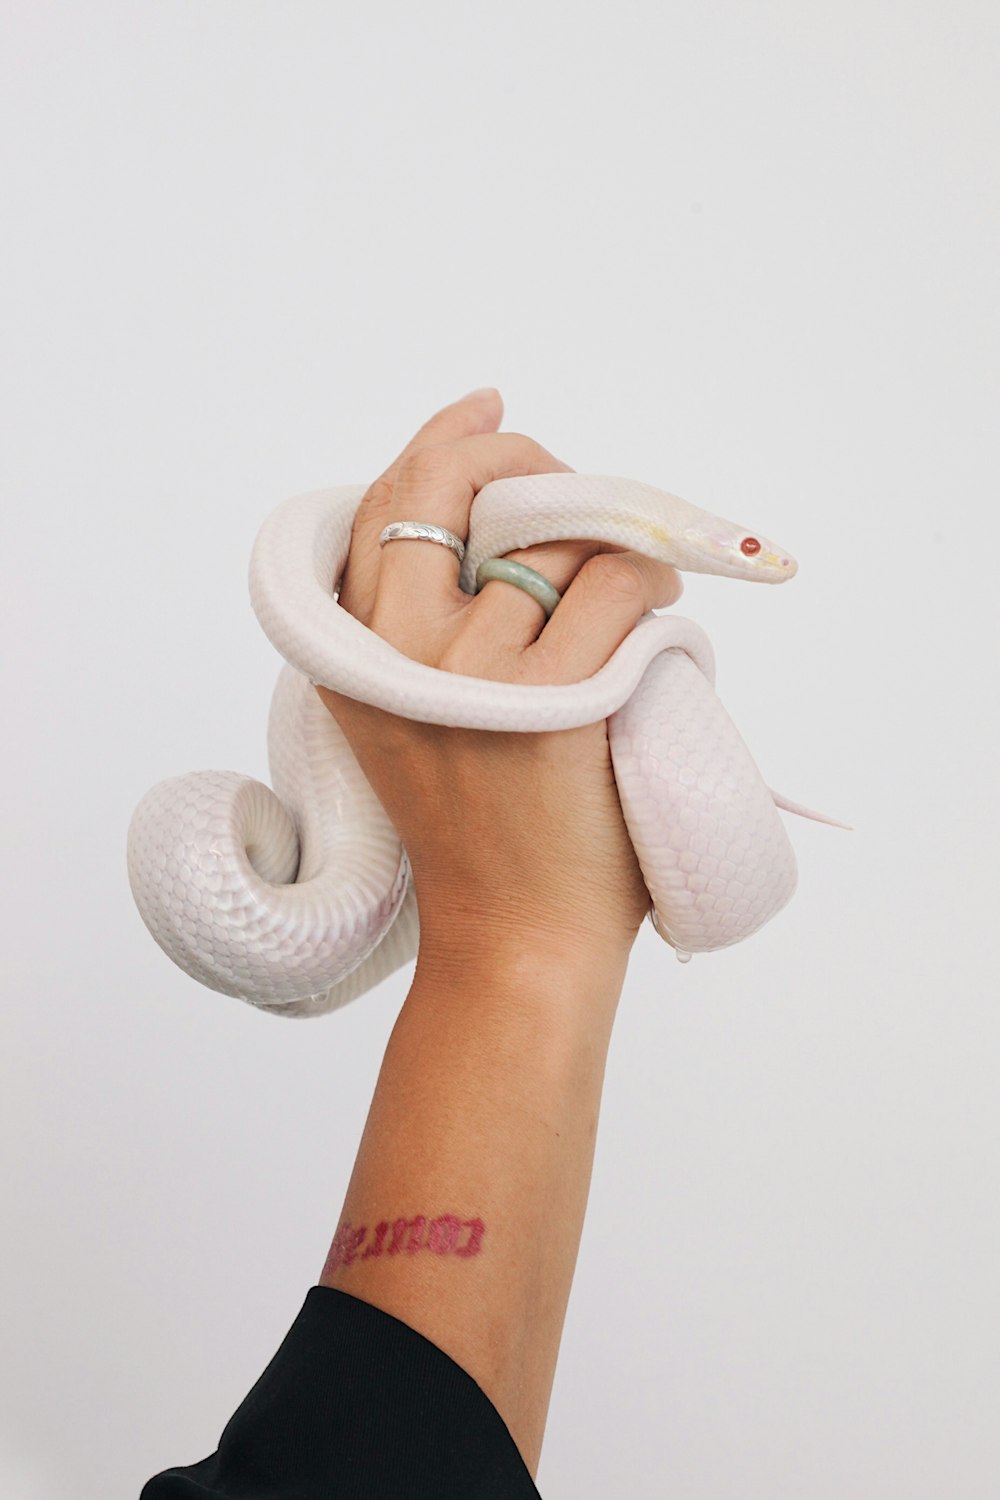 albino snake wrapped on person's hand